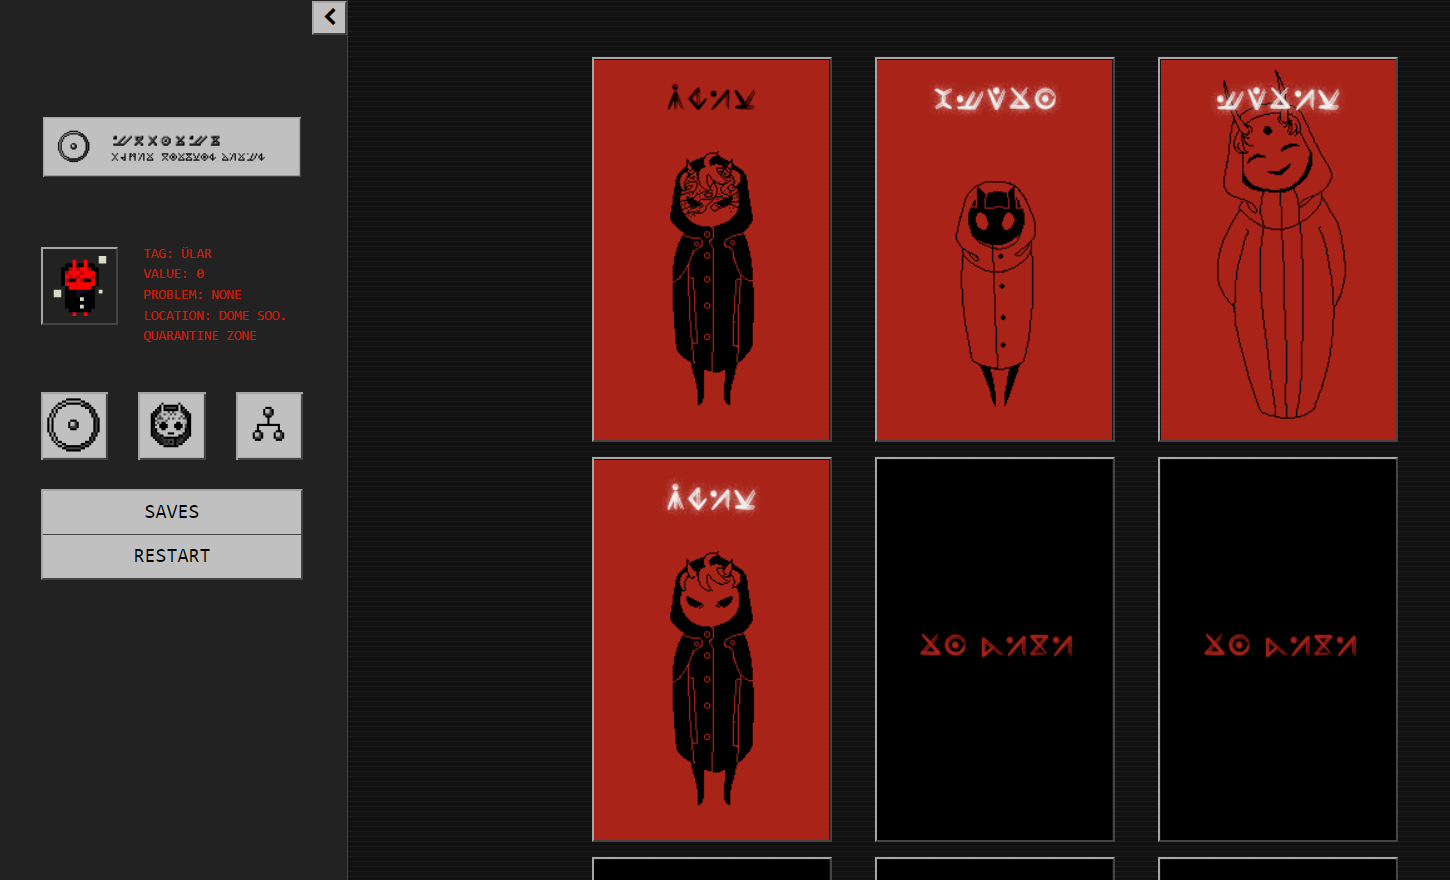 A screenshot from Mr. Rainer's Solve-It Service, which displays several "cards" depicting humanoid figures.